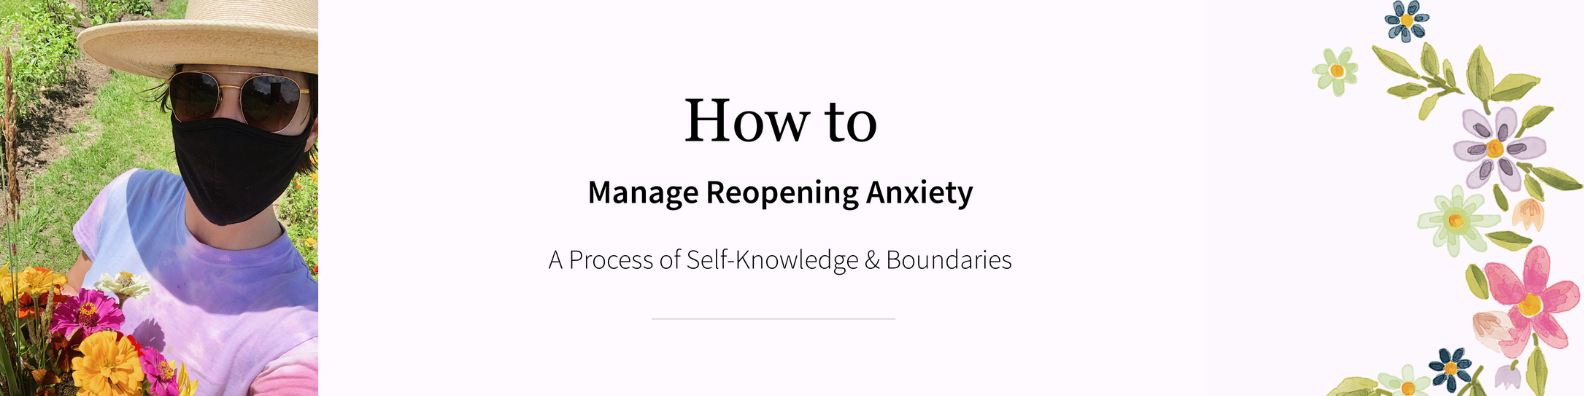 Managing Reopening Anxiety: 7 Tips to Protect Your Health